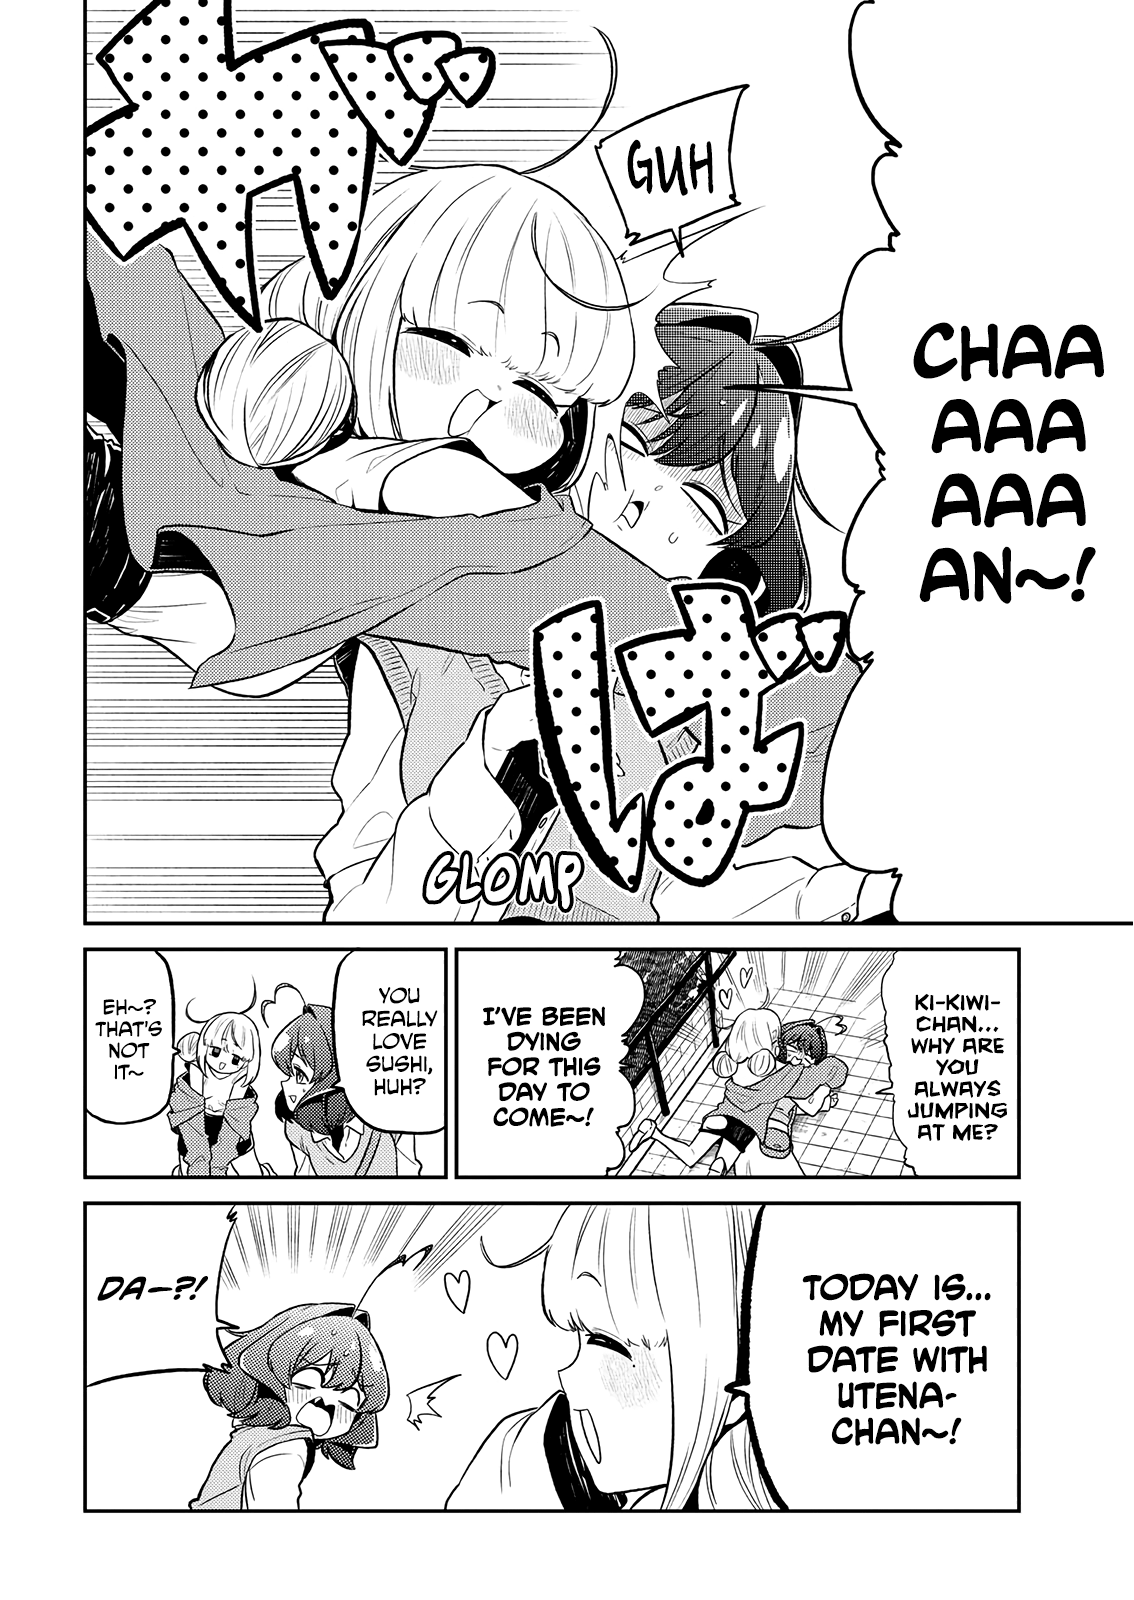 Looking Up To Magical Girls - Page 3